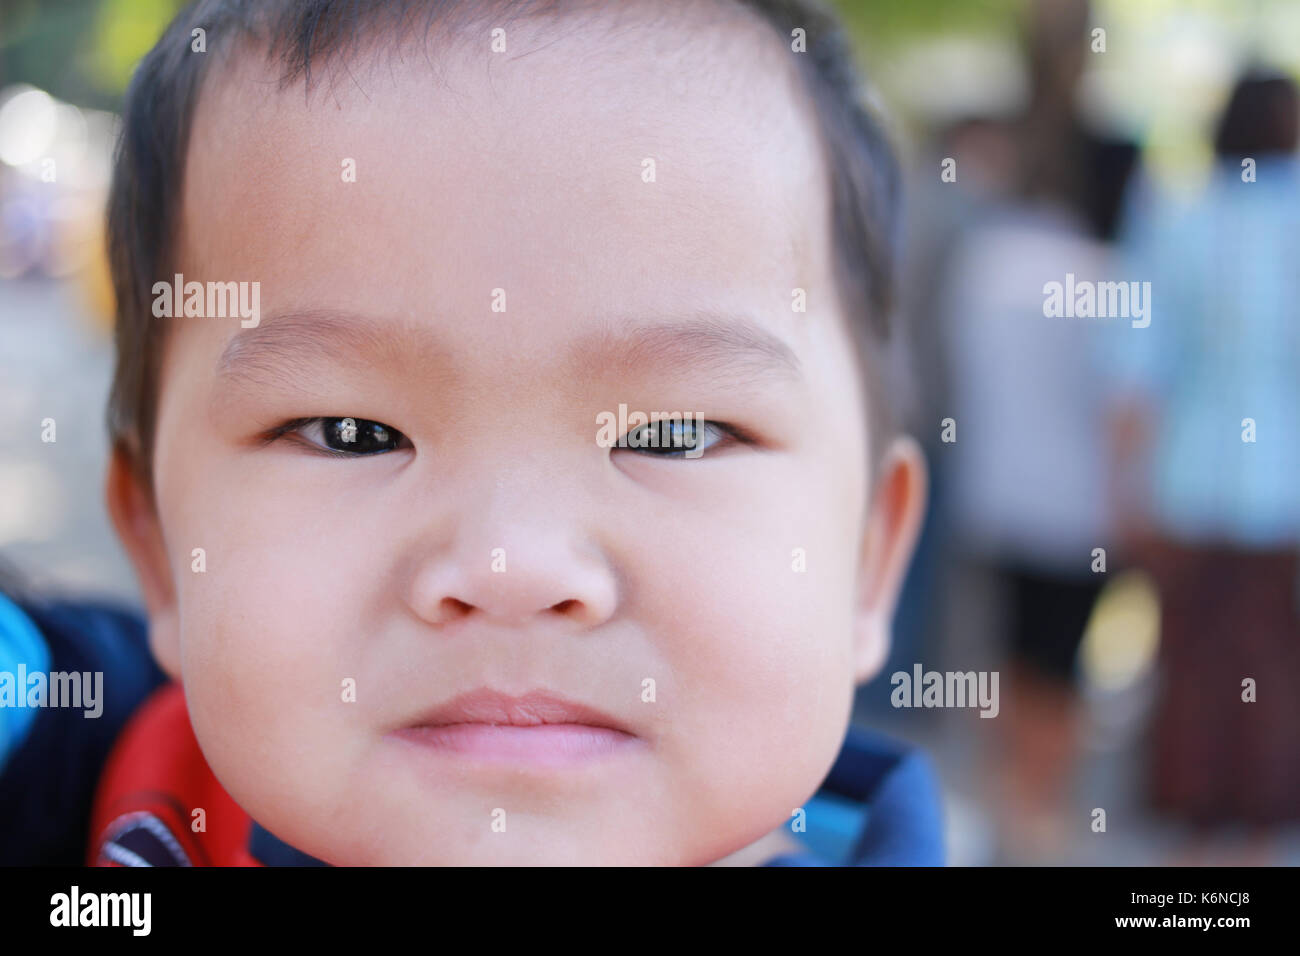 Faces of Asian children in happy concept of health and good mood. Stock Photo